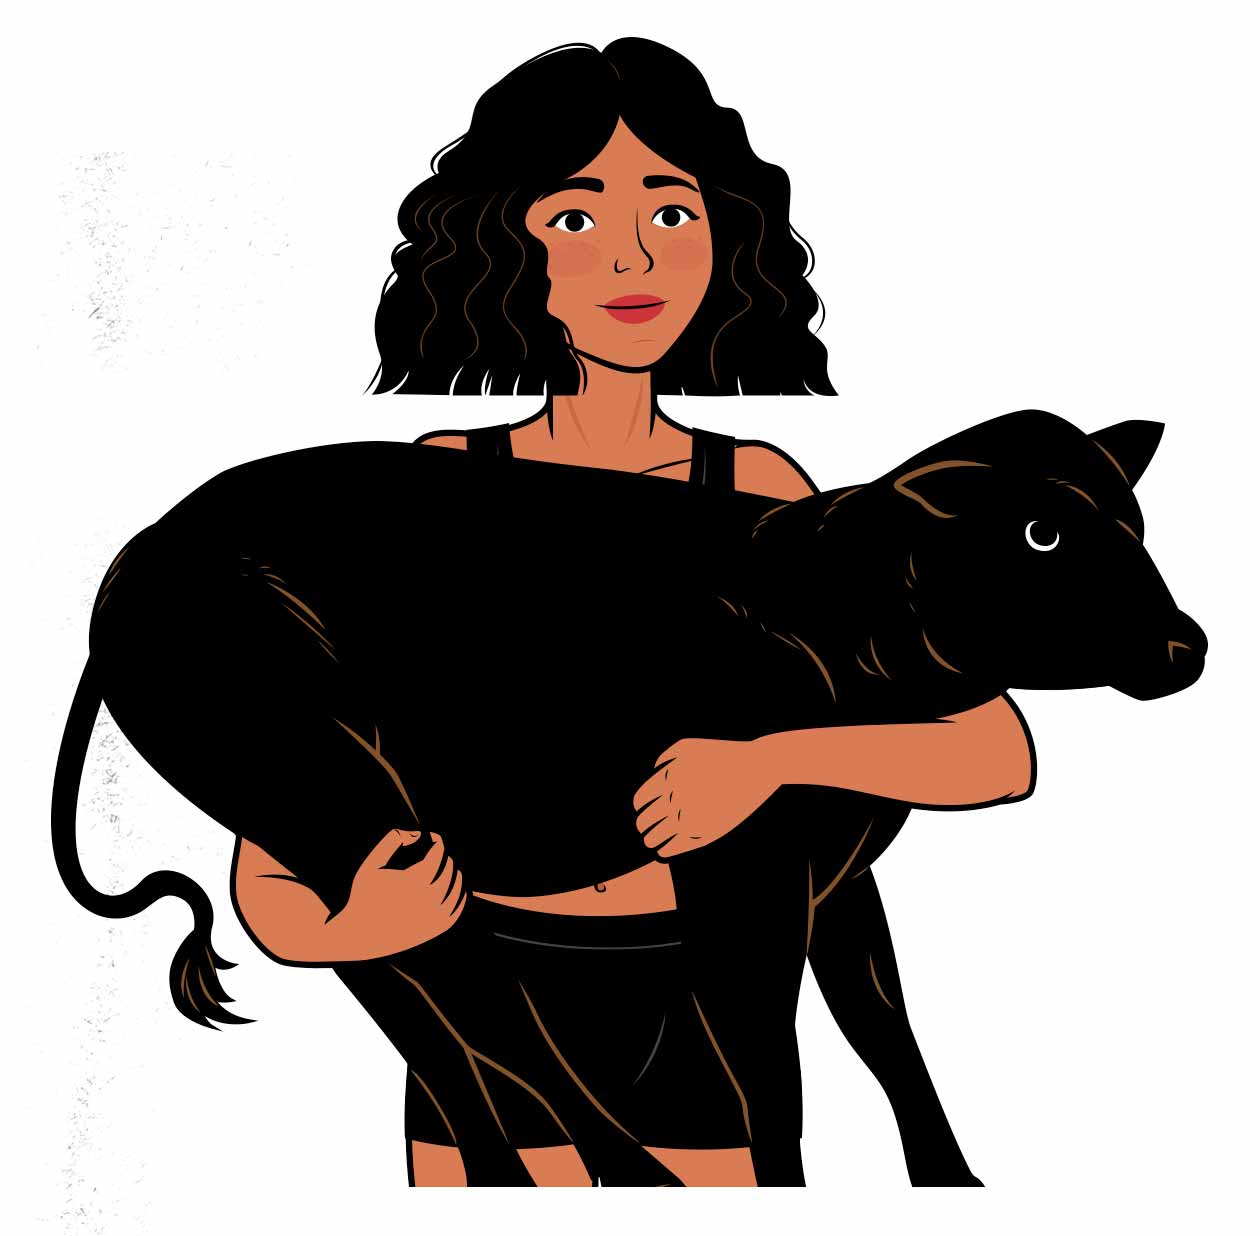 Illustration of a woman carrying a calf as it grows into a bull, progressively overloading her muscles.